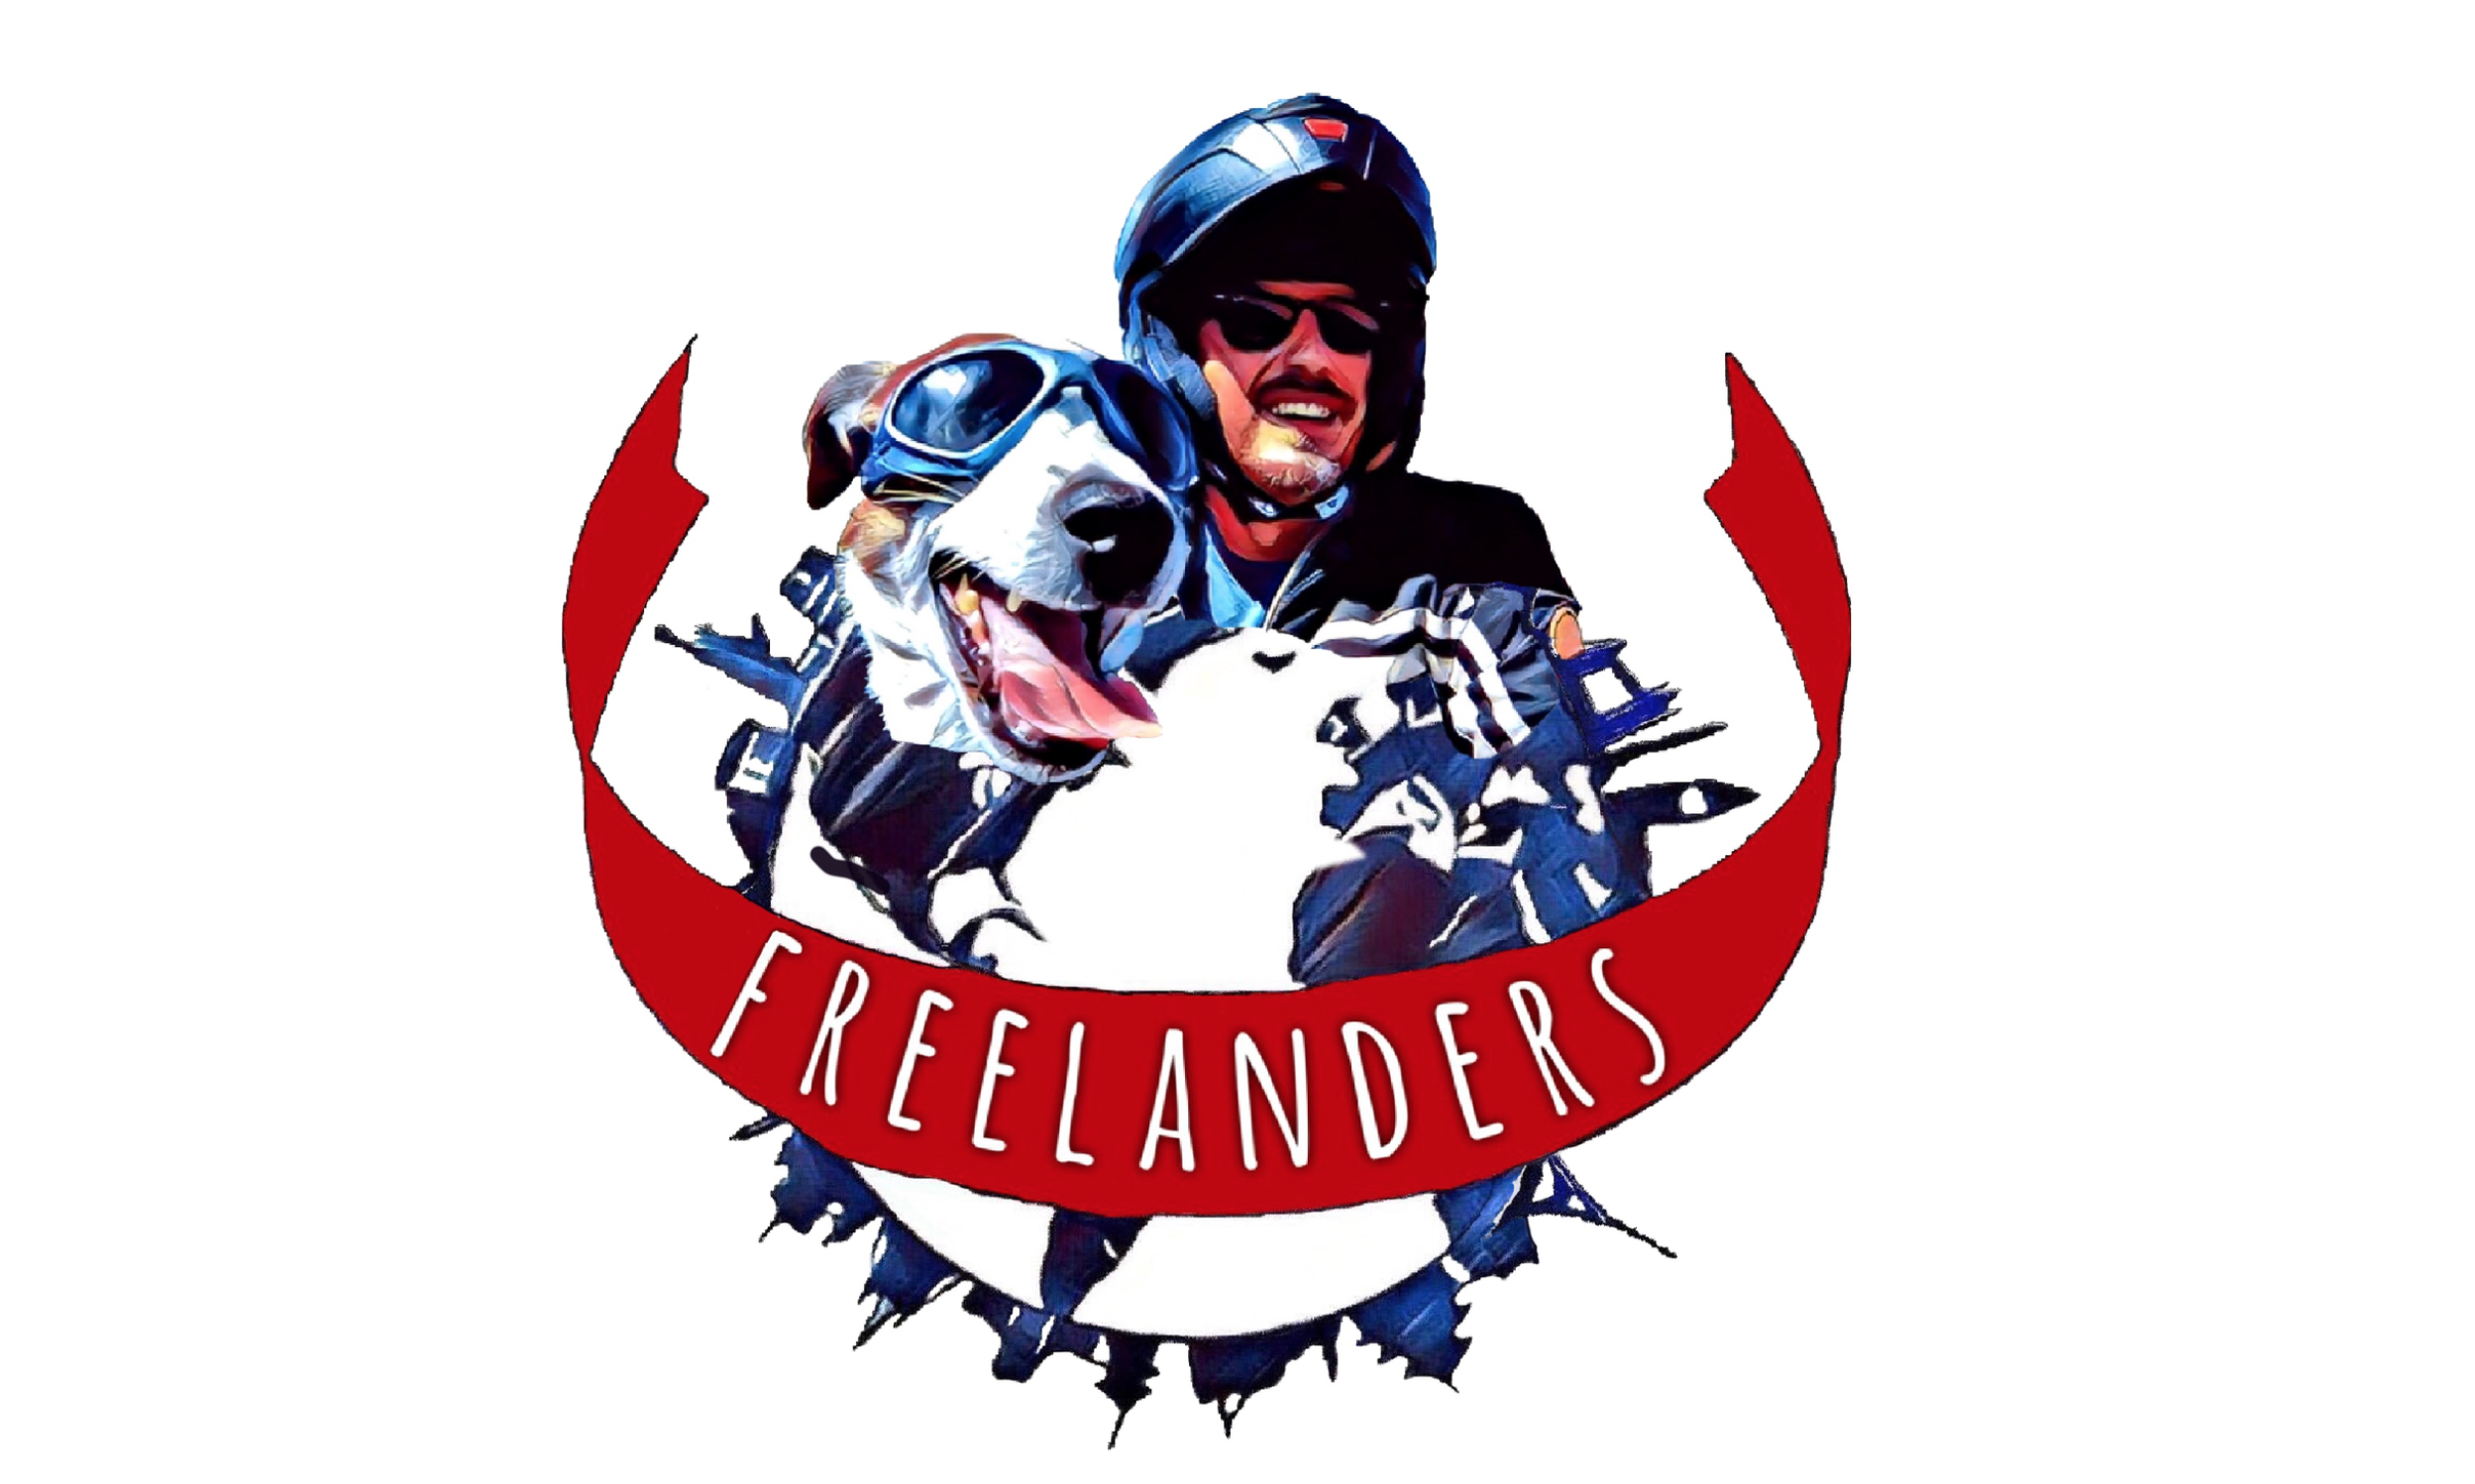 Freelanders - The 1st Round the World of a man with his dog